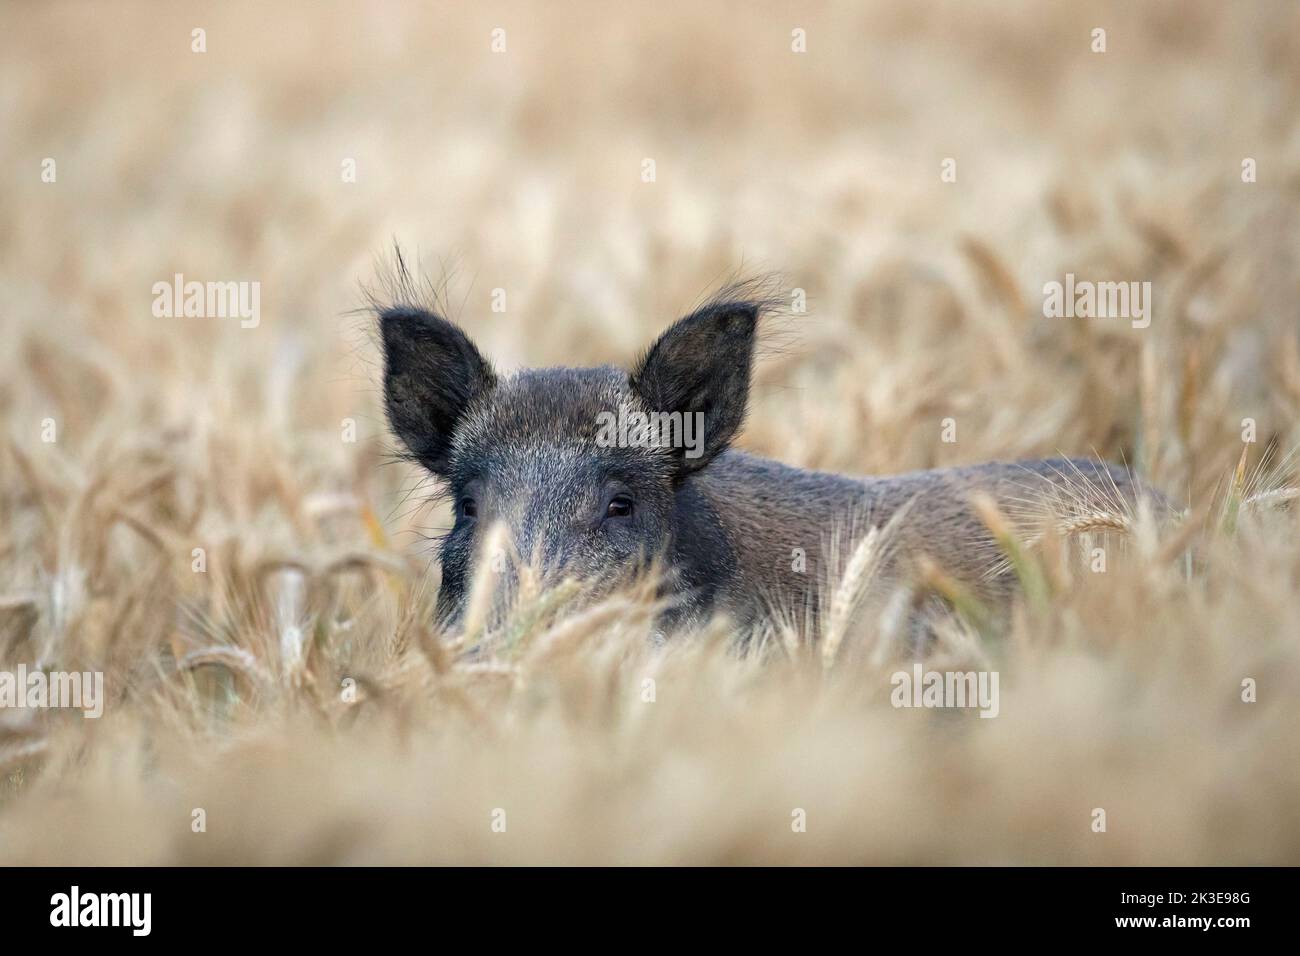 Solitary wild boar (Sus scrofa) sow / female foraging in wheat field in summer Stock Photo